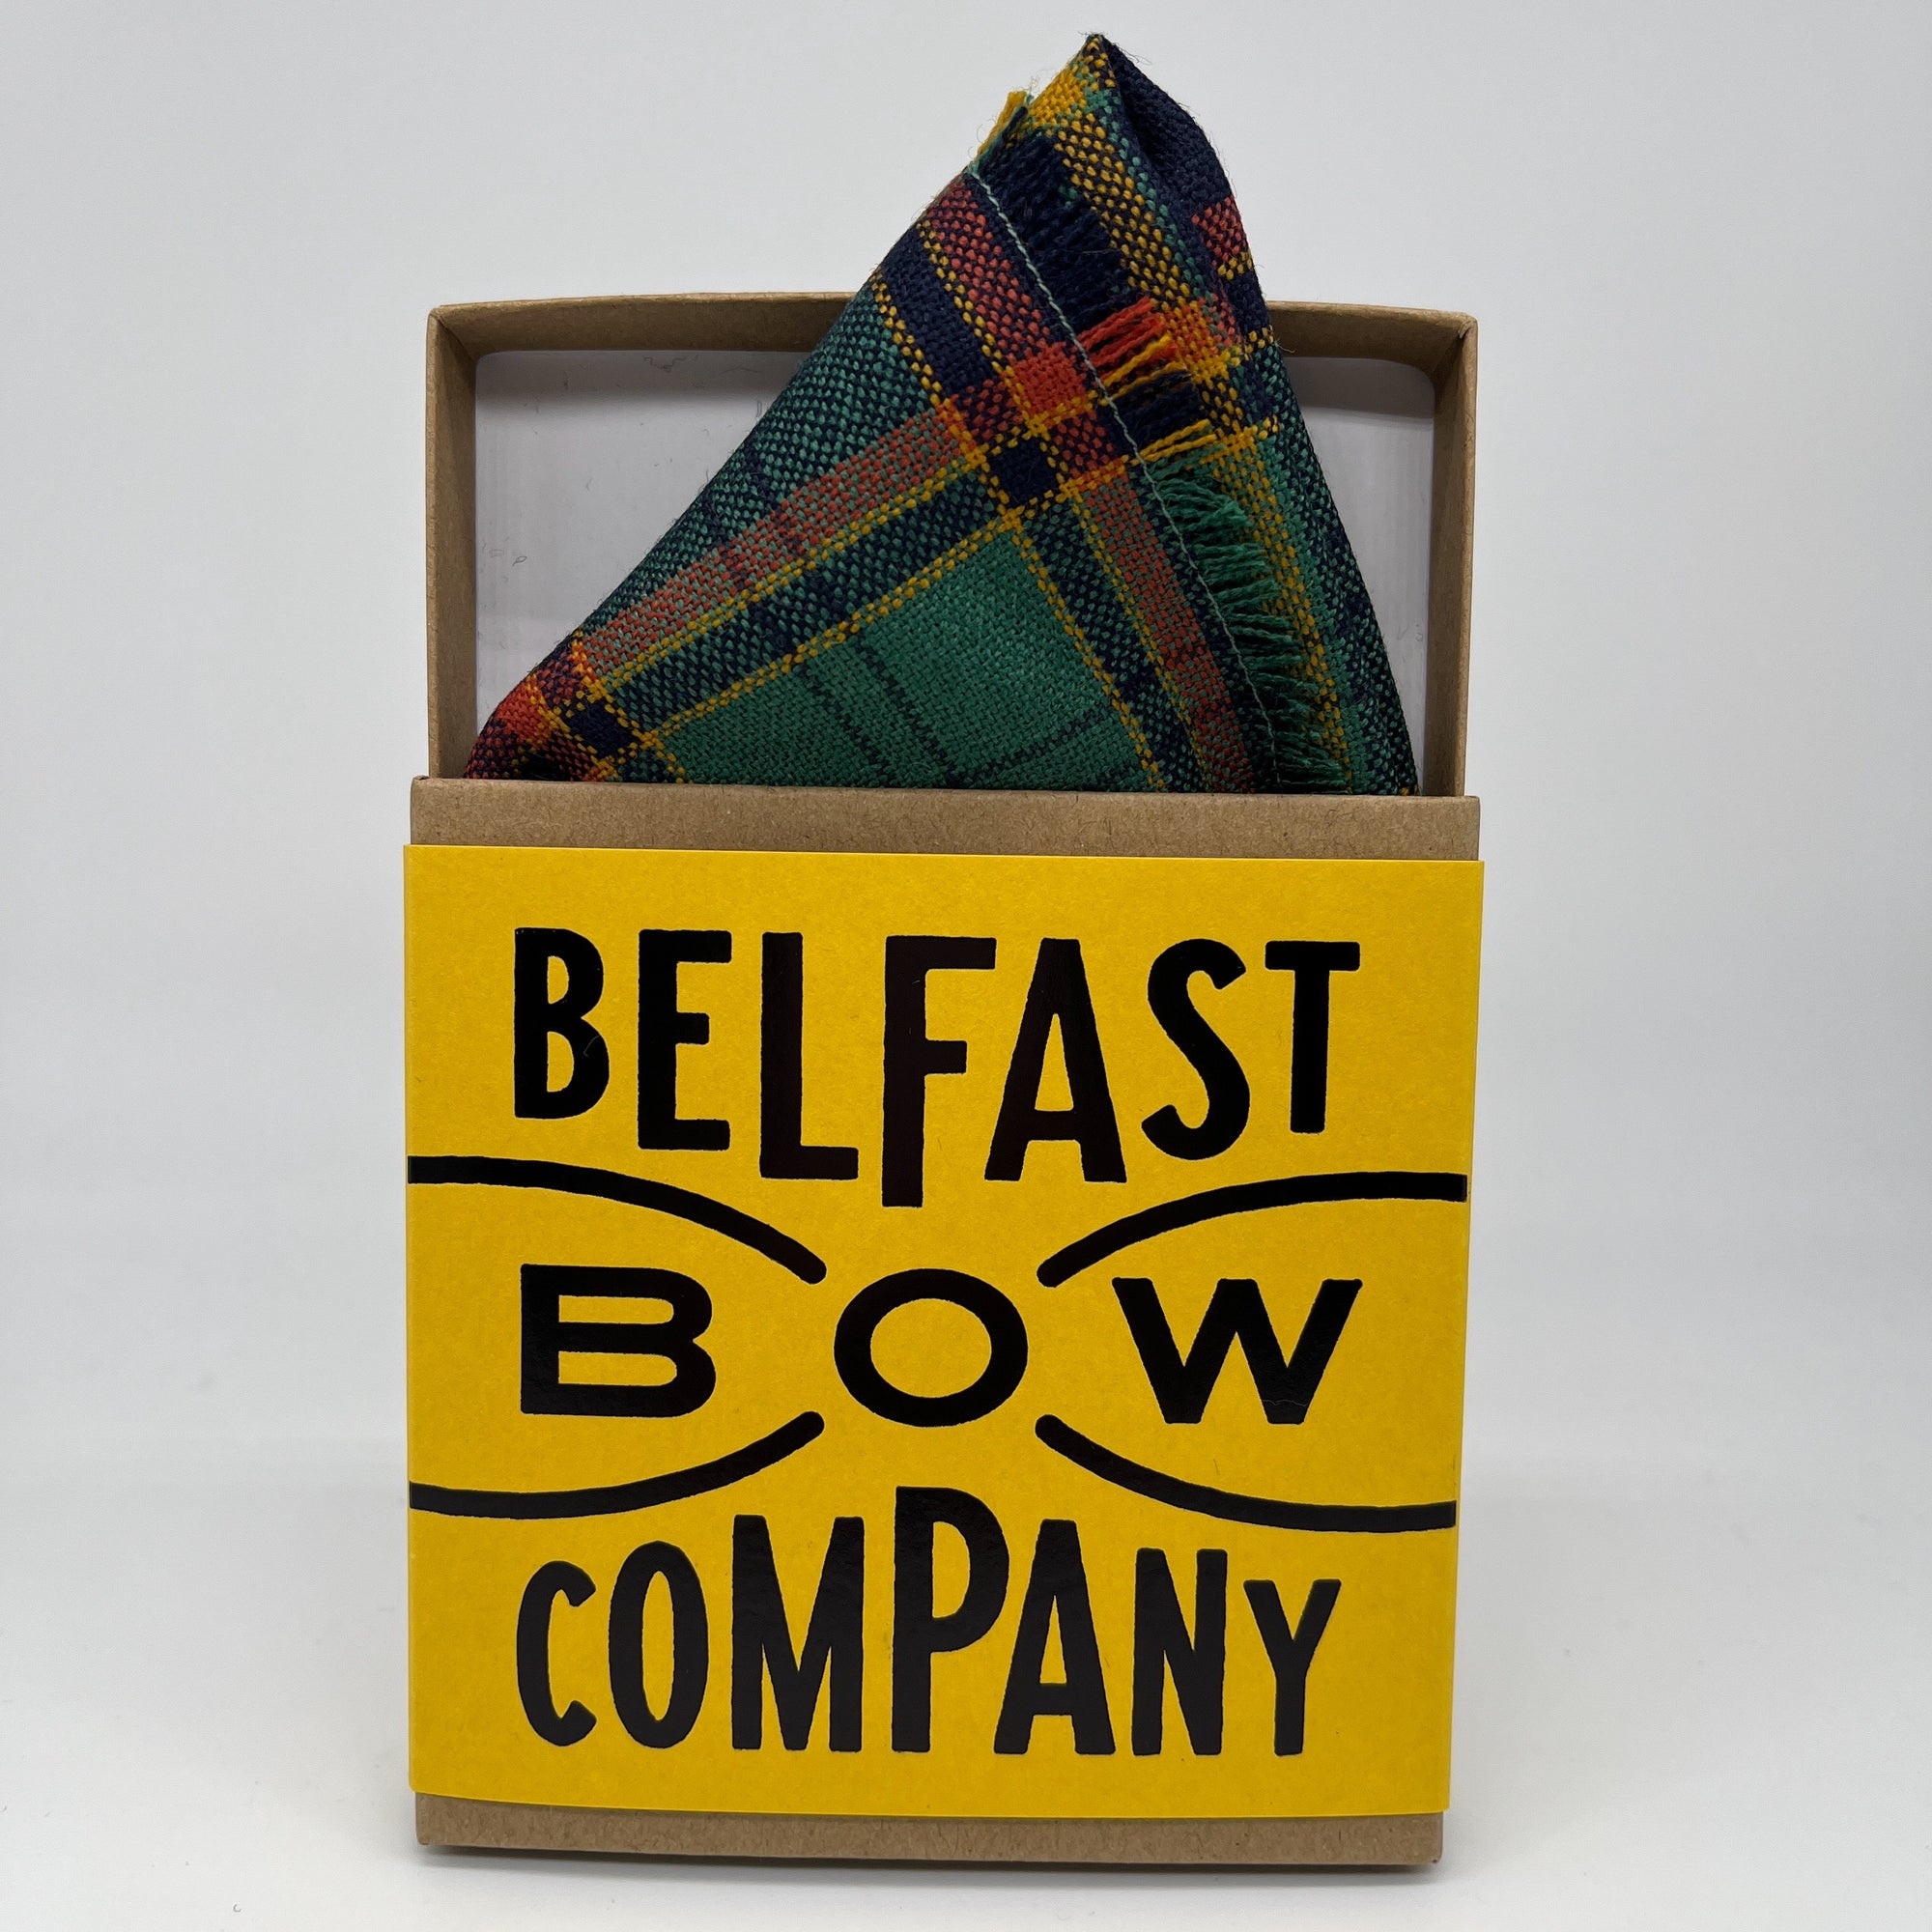 County Antrim Pocket Square by the Belfast Bow Company